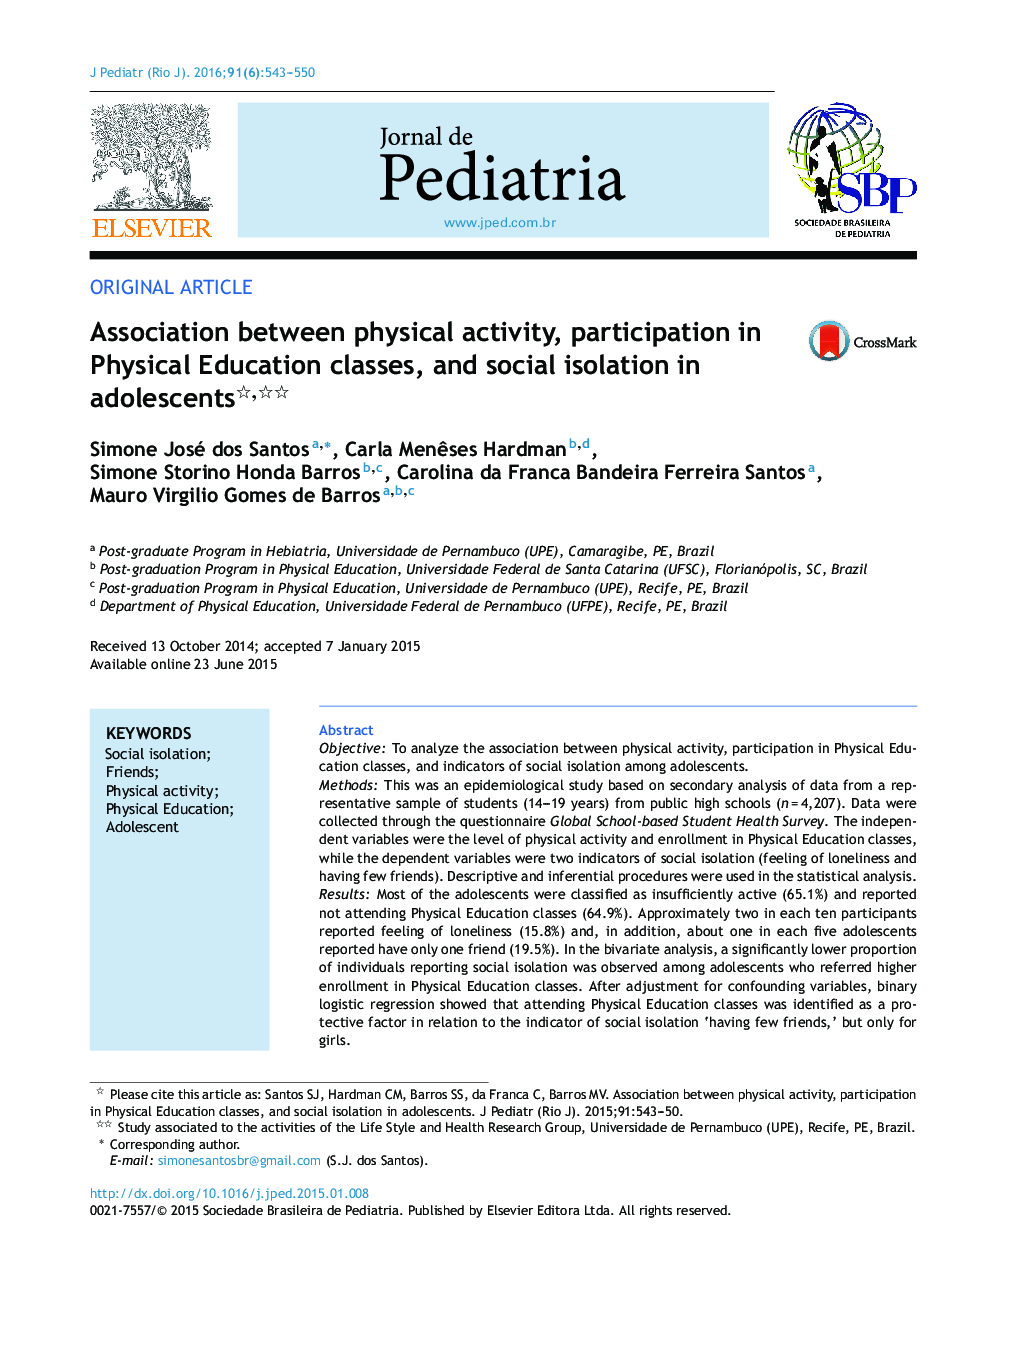 Association between physical activity, participation in Physical Education classes, and social isolation in adolescents 